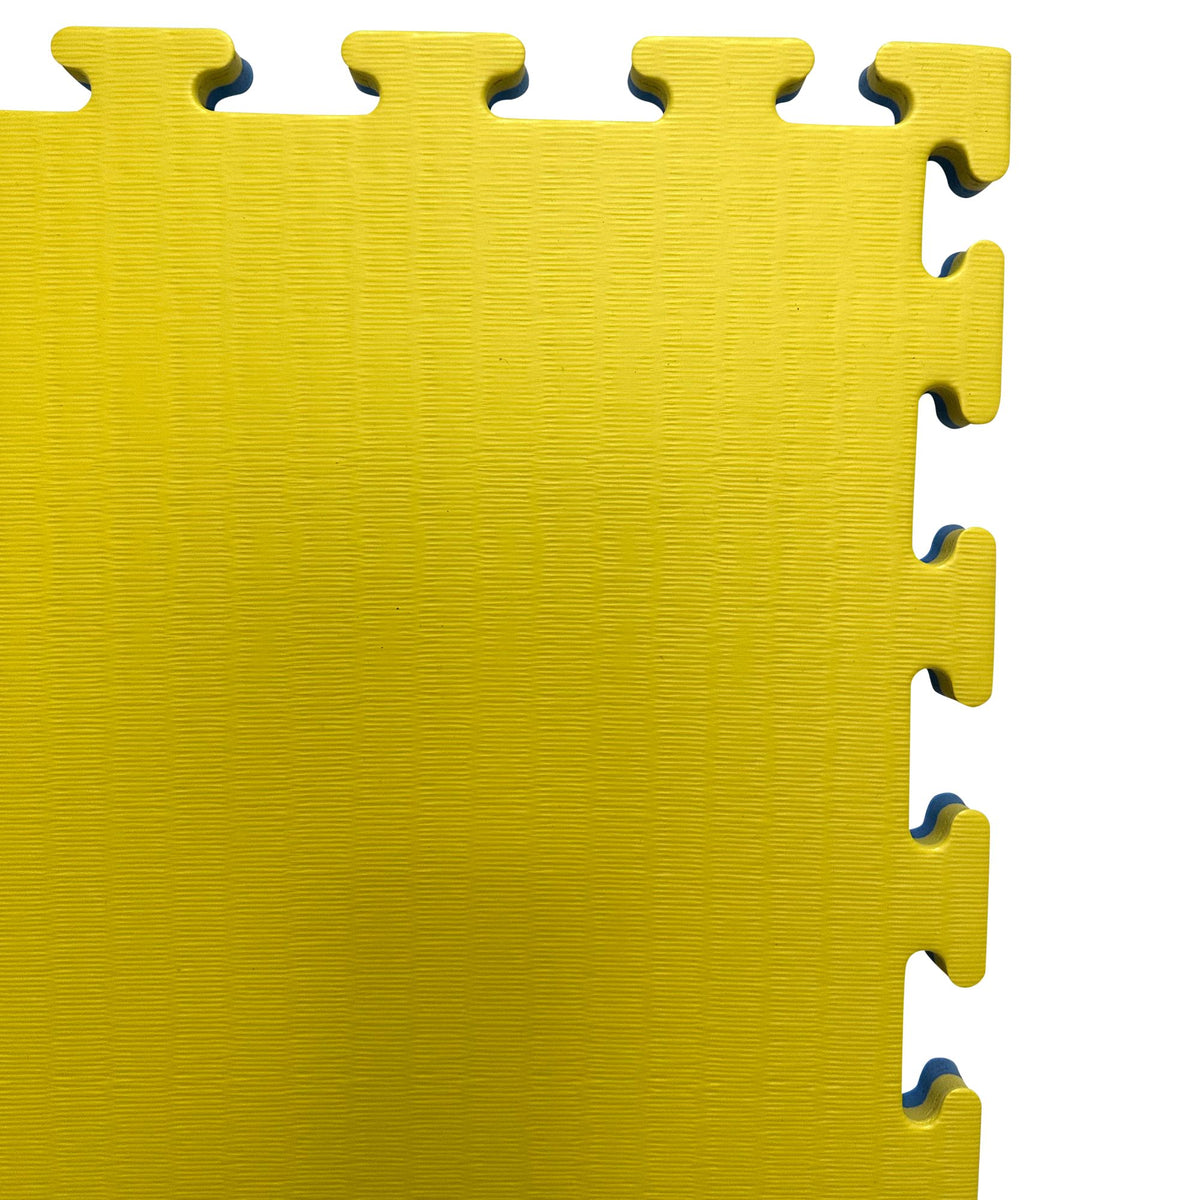 Cannons UK 20mm Premium Tatami Jigsaw Mats reversible yellow and blue from just £16.99 inc VAT and free Delivery - Cannons UK